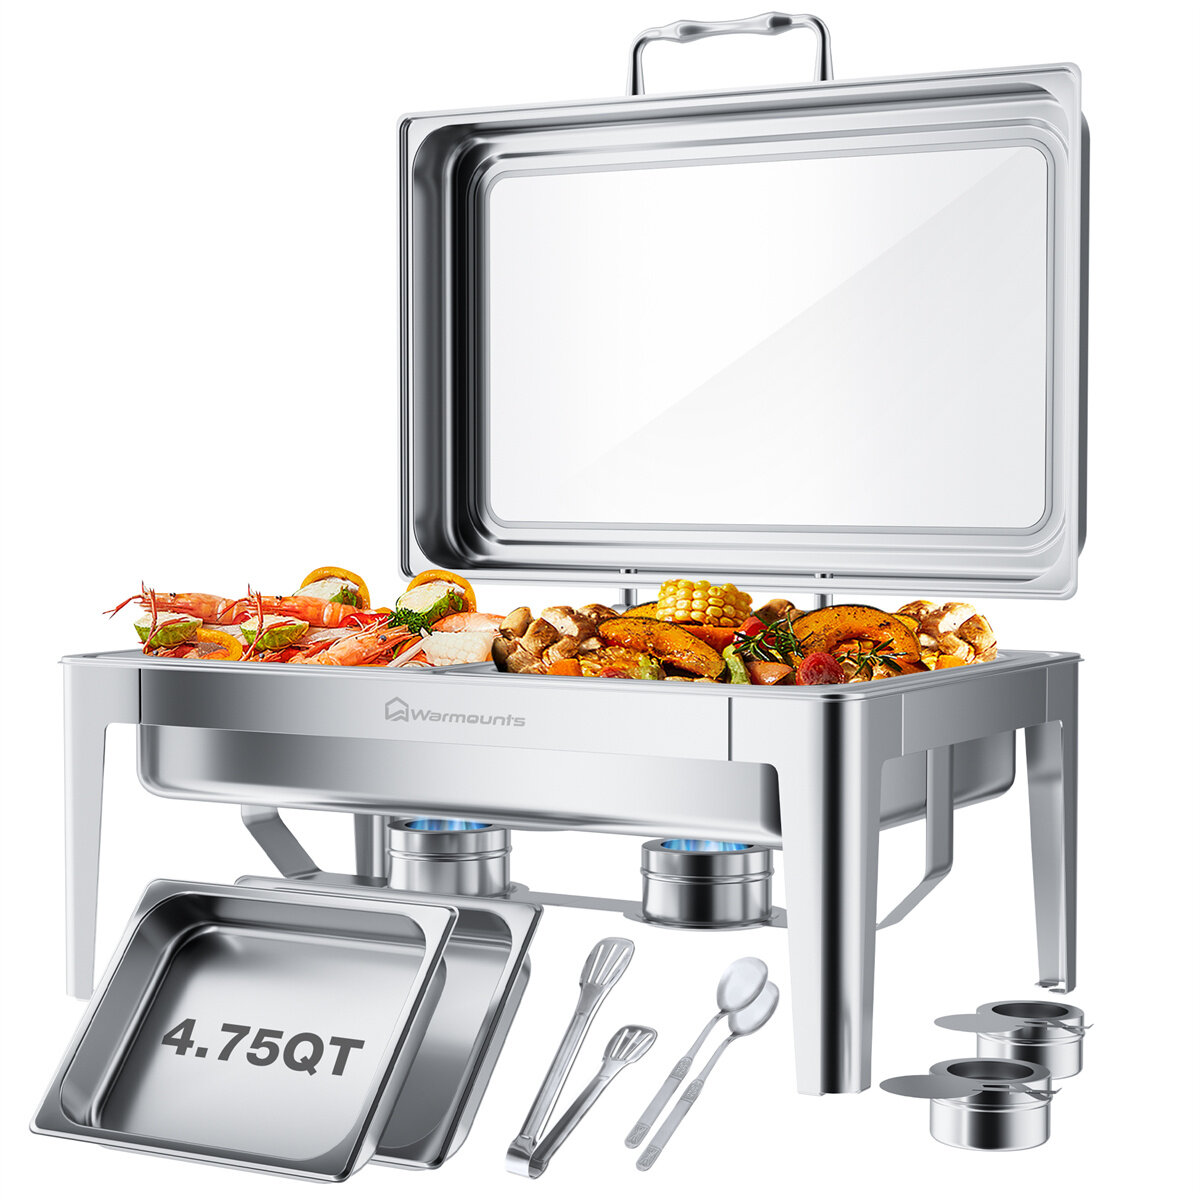 

Warmounts 9.5QT Rectangular Chafing Dish Buffet Set with Hydraulic PivotLid, Stainless Steel Catering Server Food Warmer